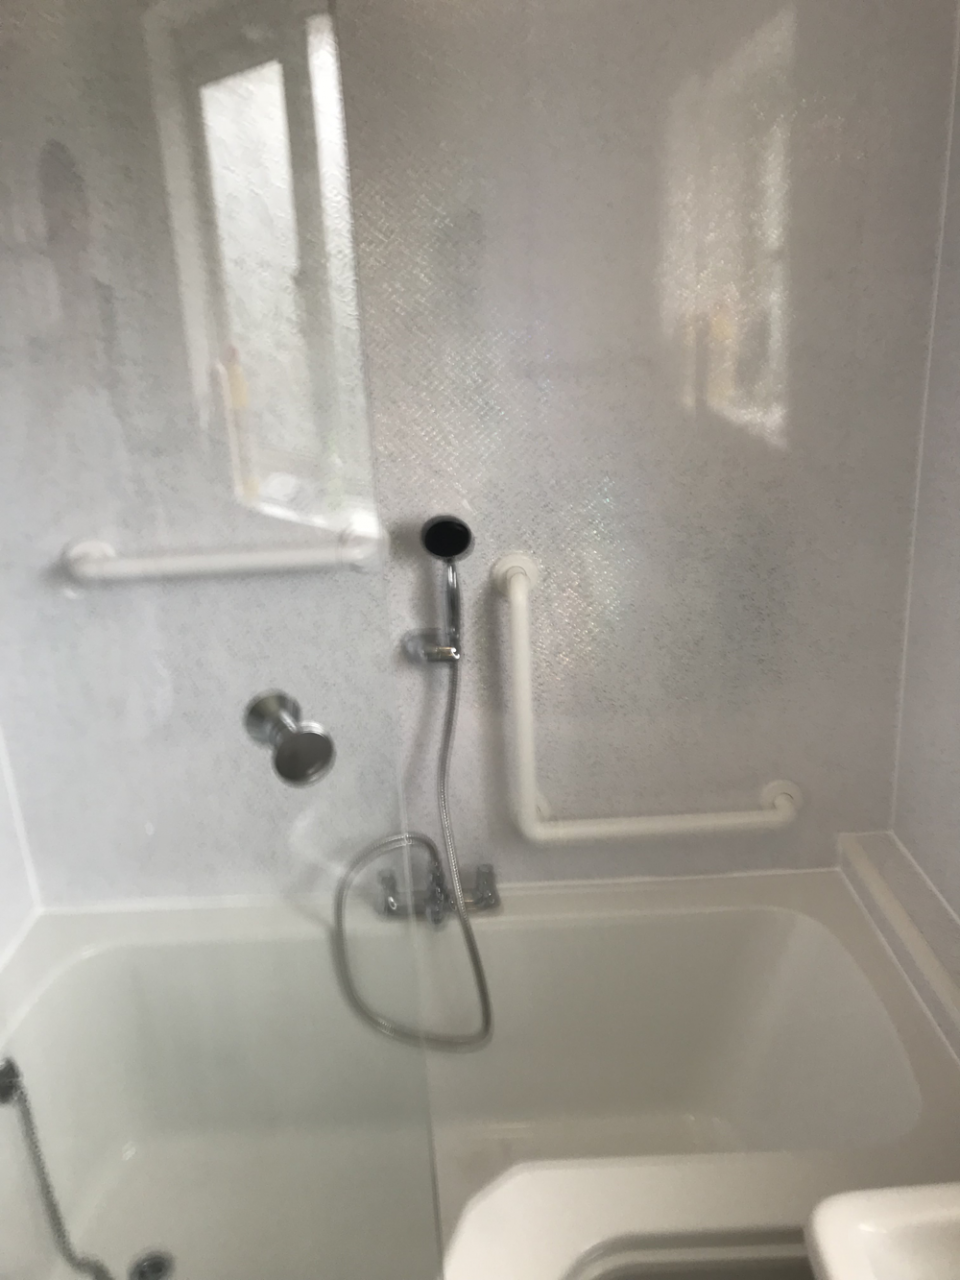 Luxury walk in bath with shower and wall rails to help with mobility